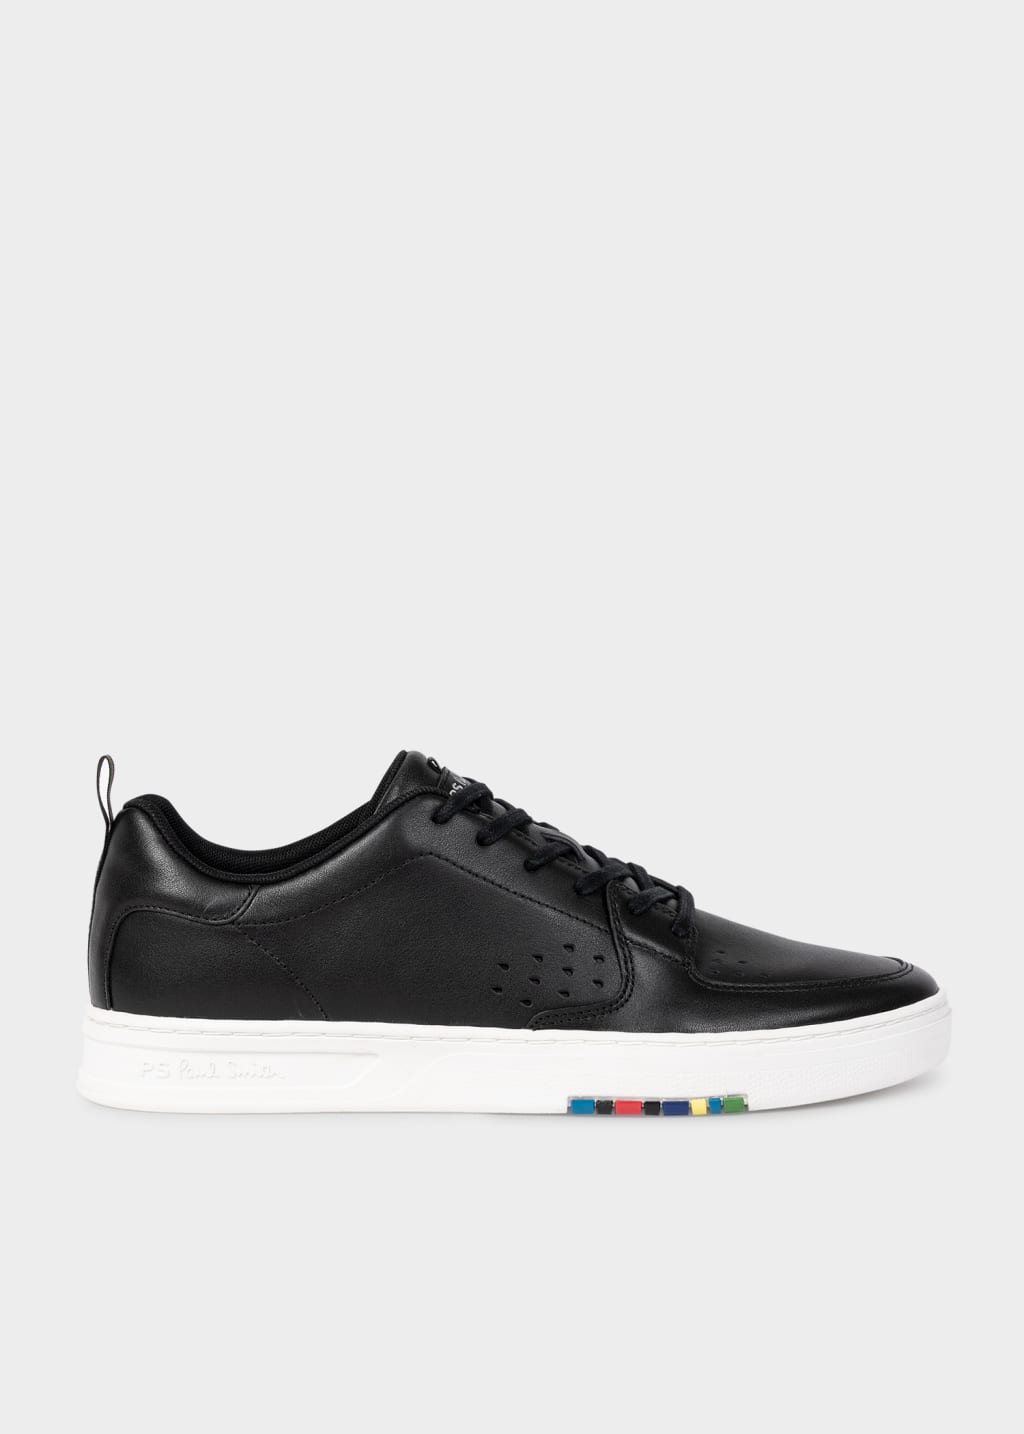 Detail View - Black Leather 'Cosmo' Trainers With White Sole Paul Smith